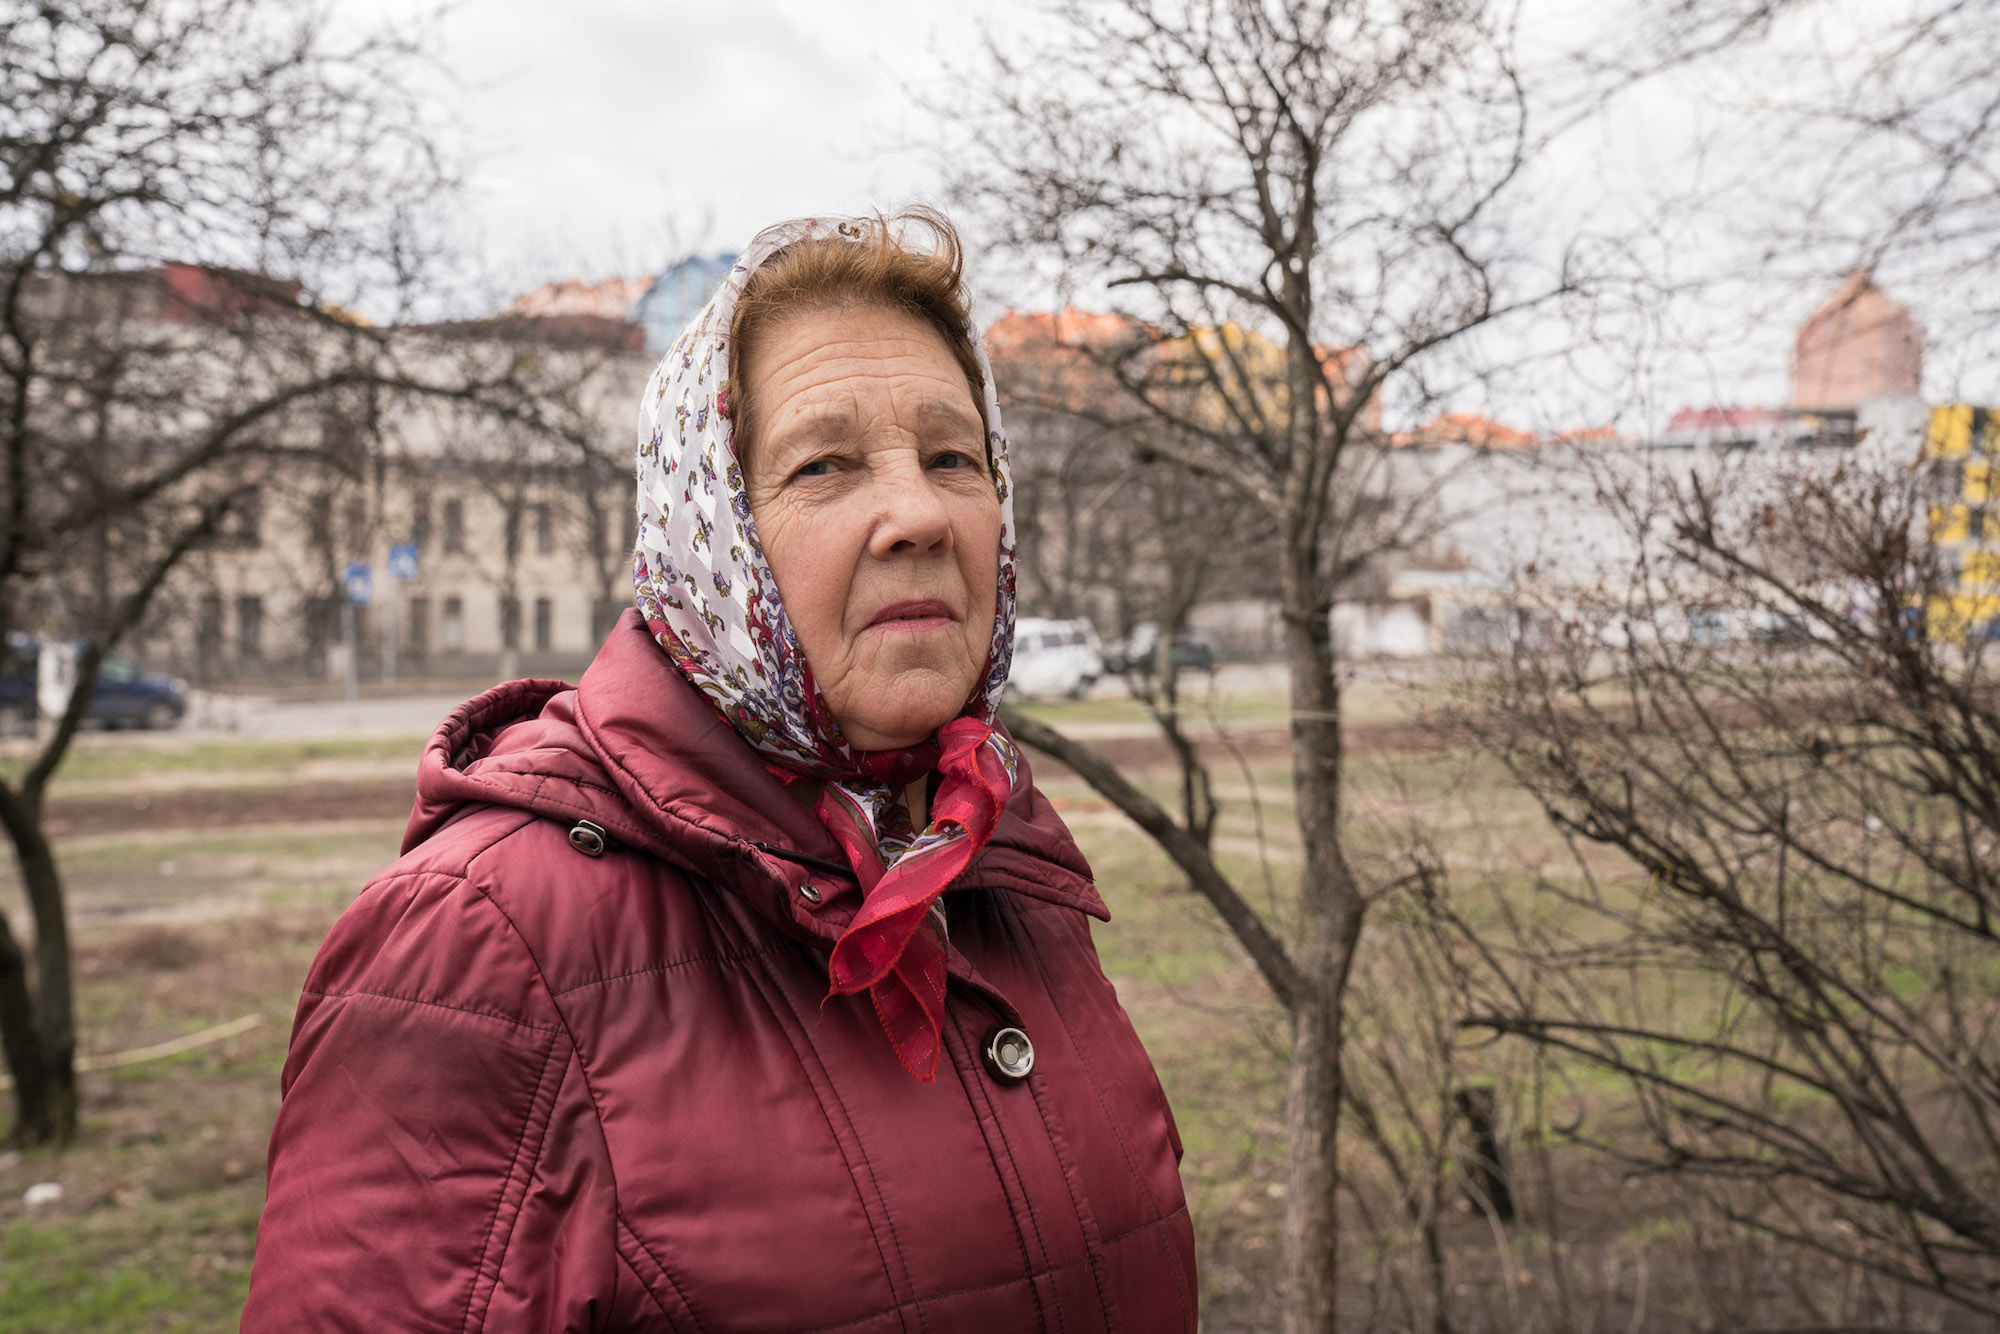 Maria, 76, is retired and lives in a krushchevska overlooking Comfort Town